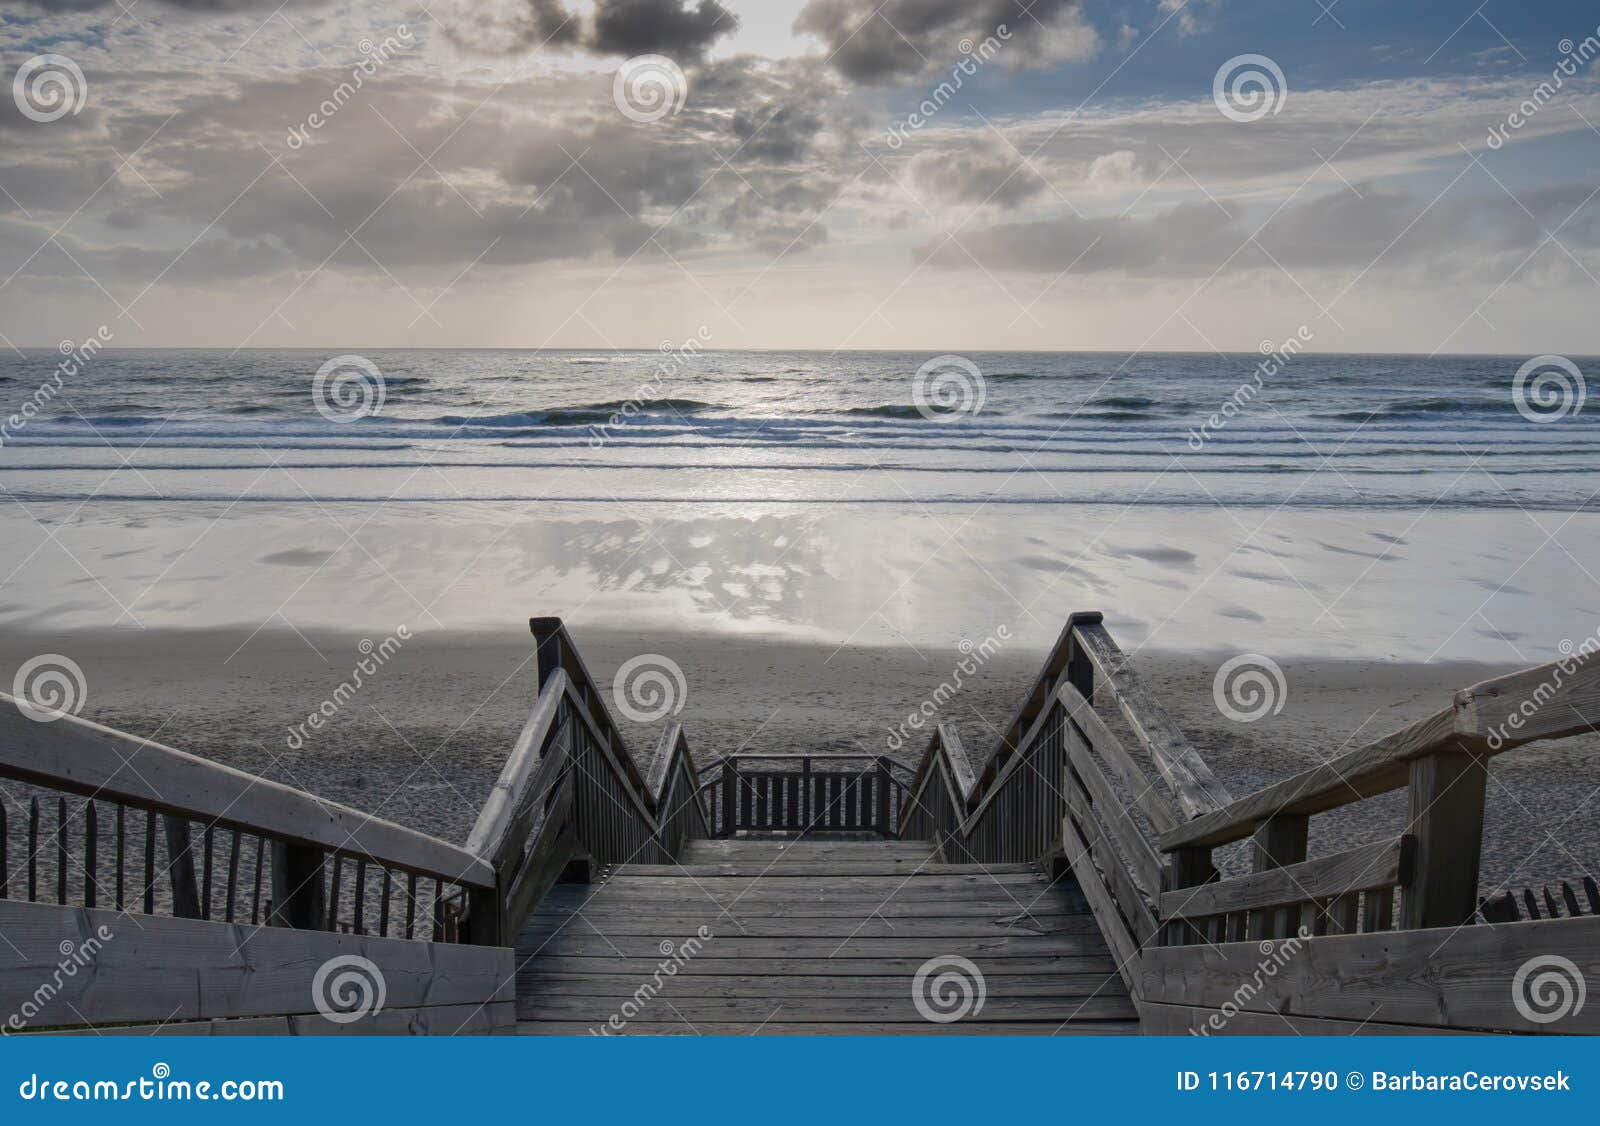 scenic biscarrosse beach in sunset with clouds and wooden footpath stairs, france